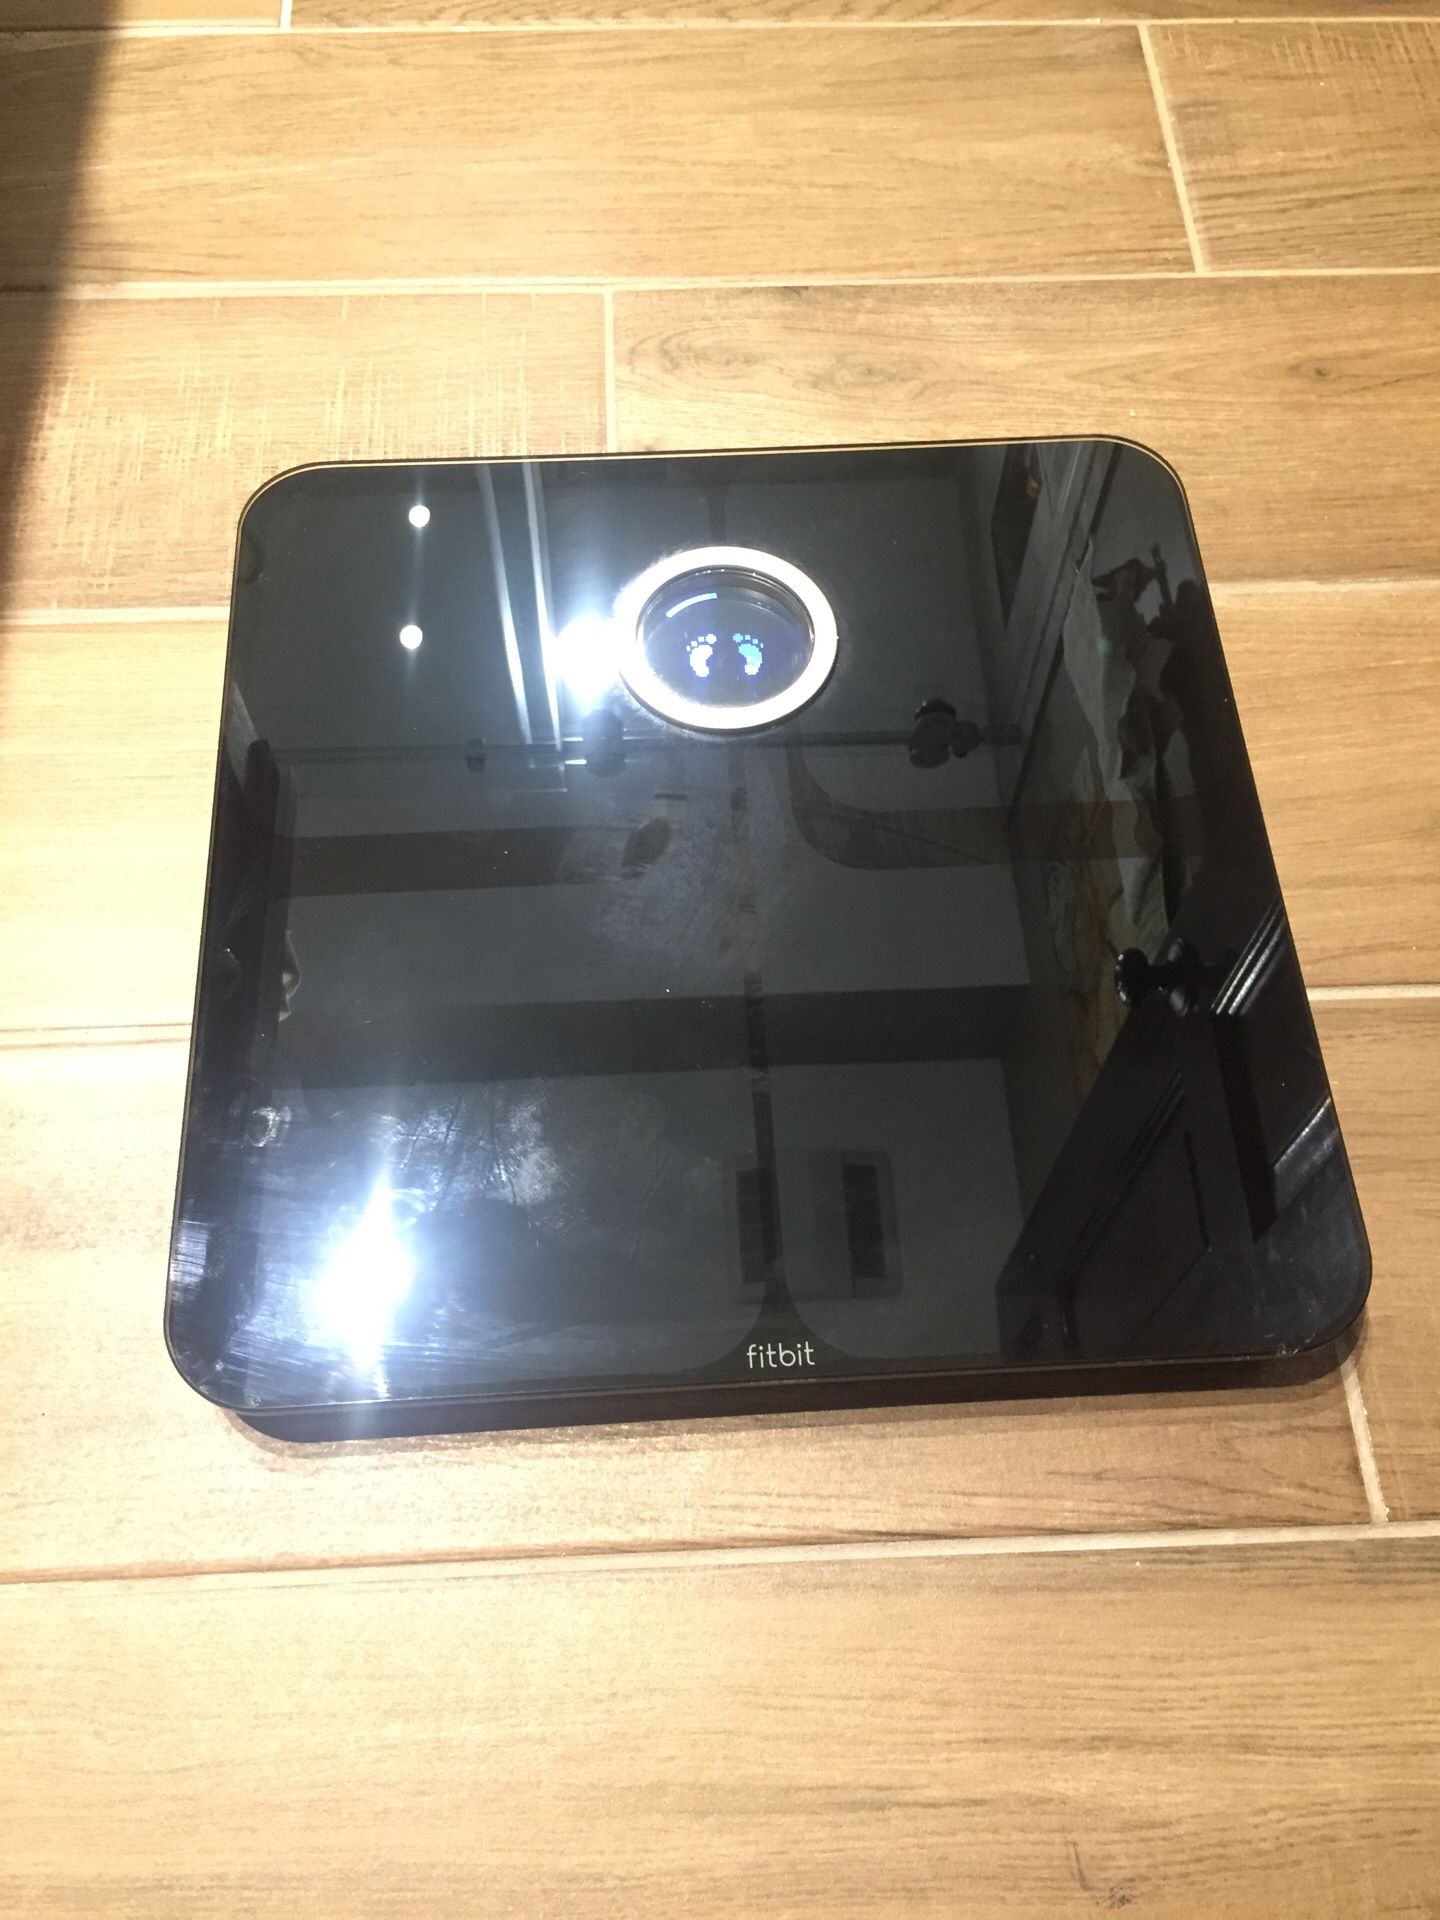 FitBit Aria 2 wifi enabled scale